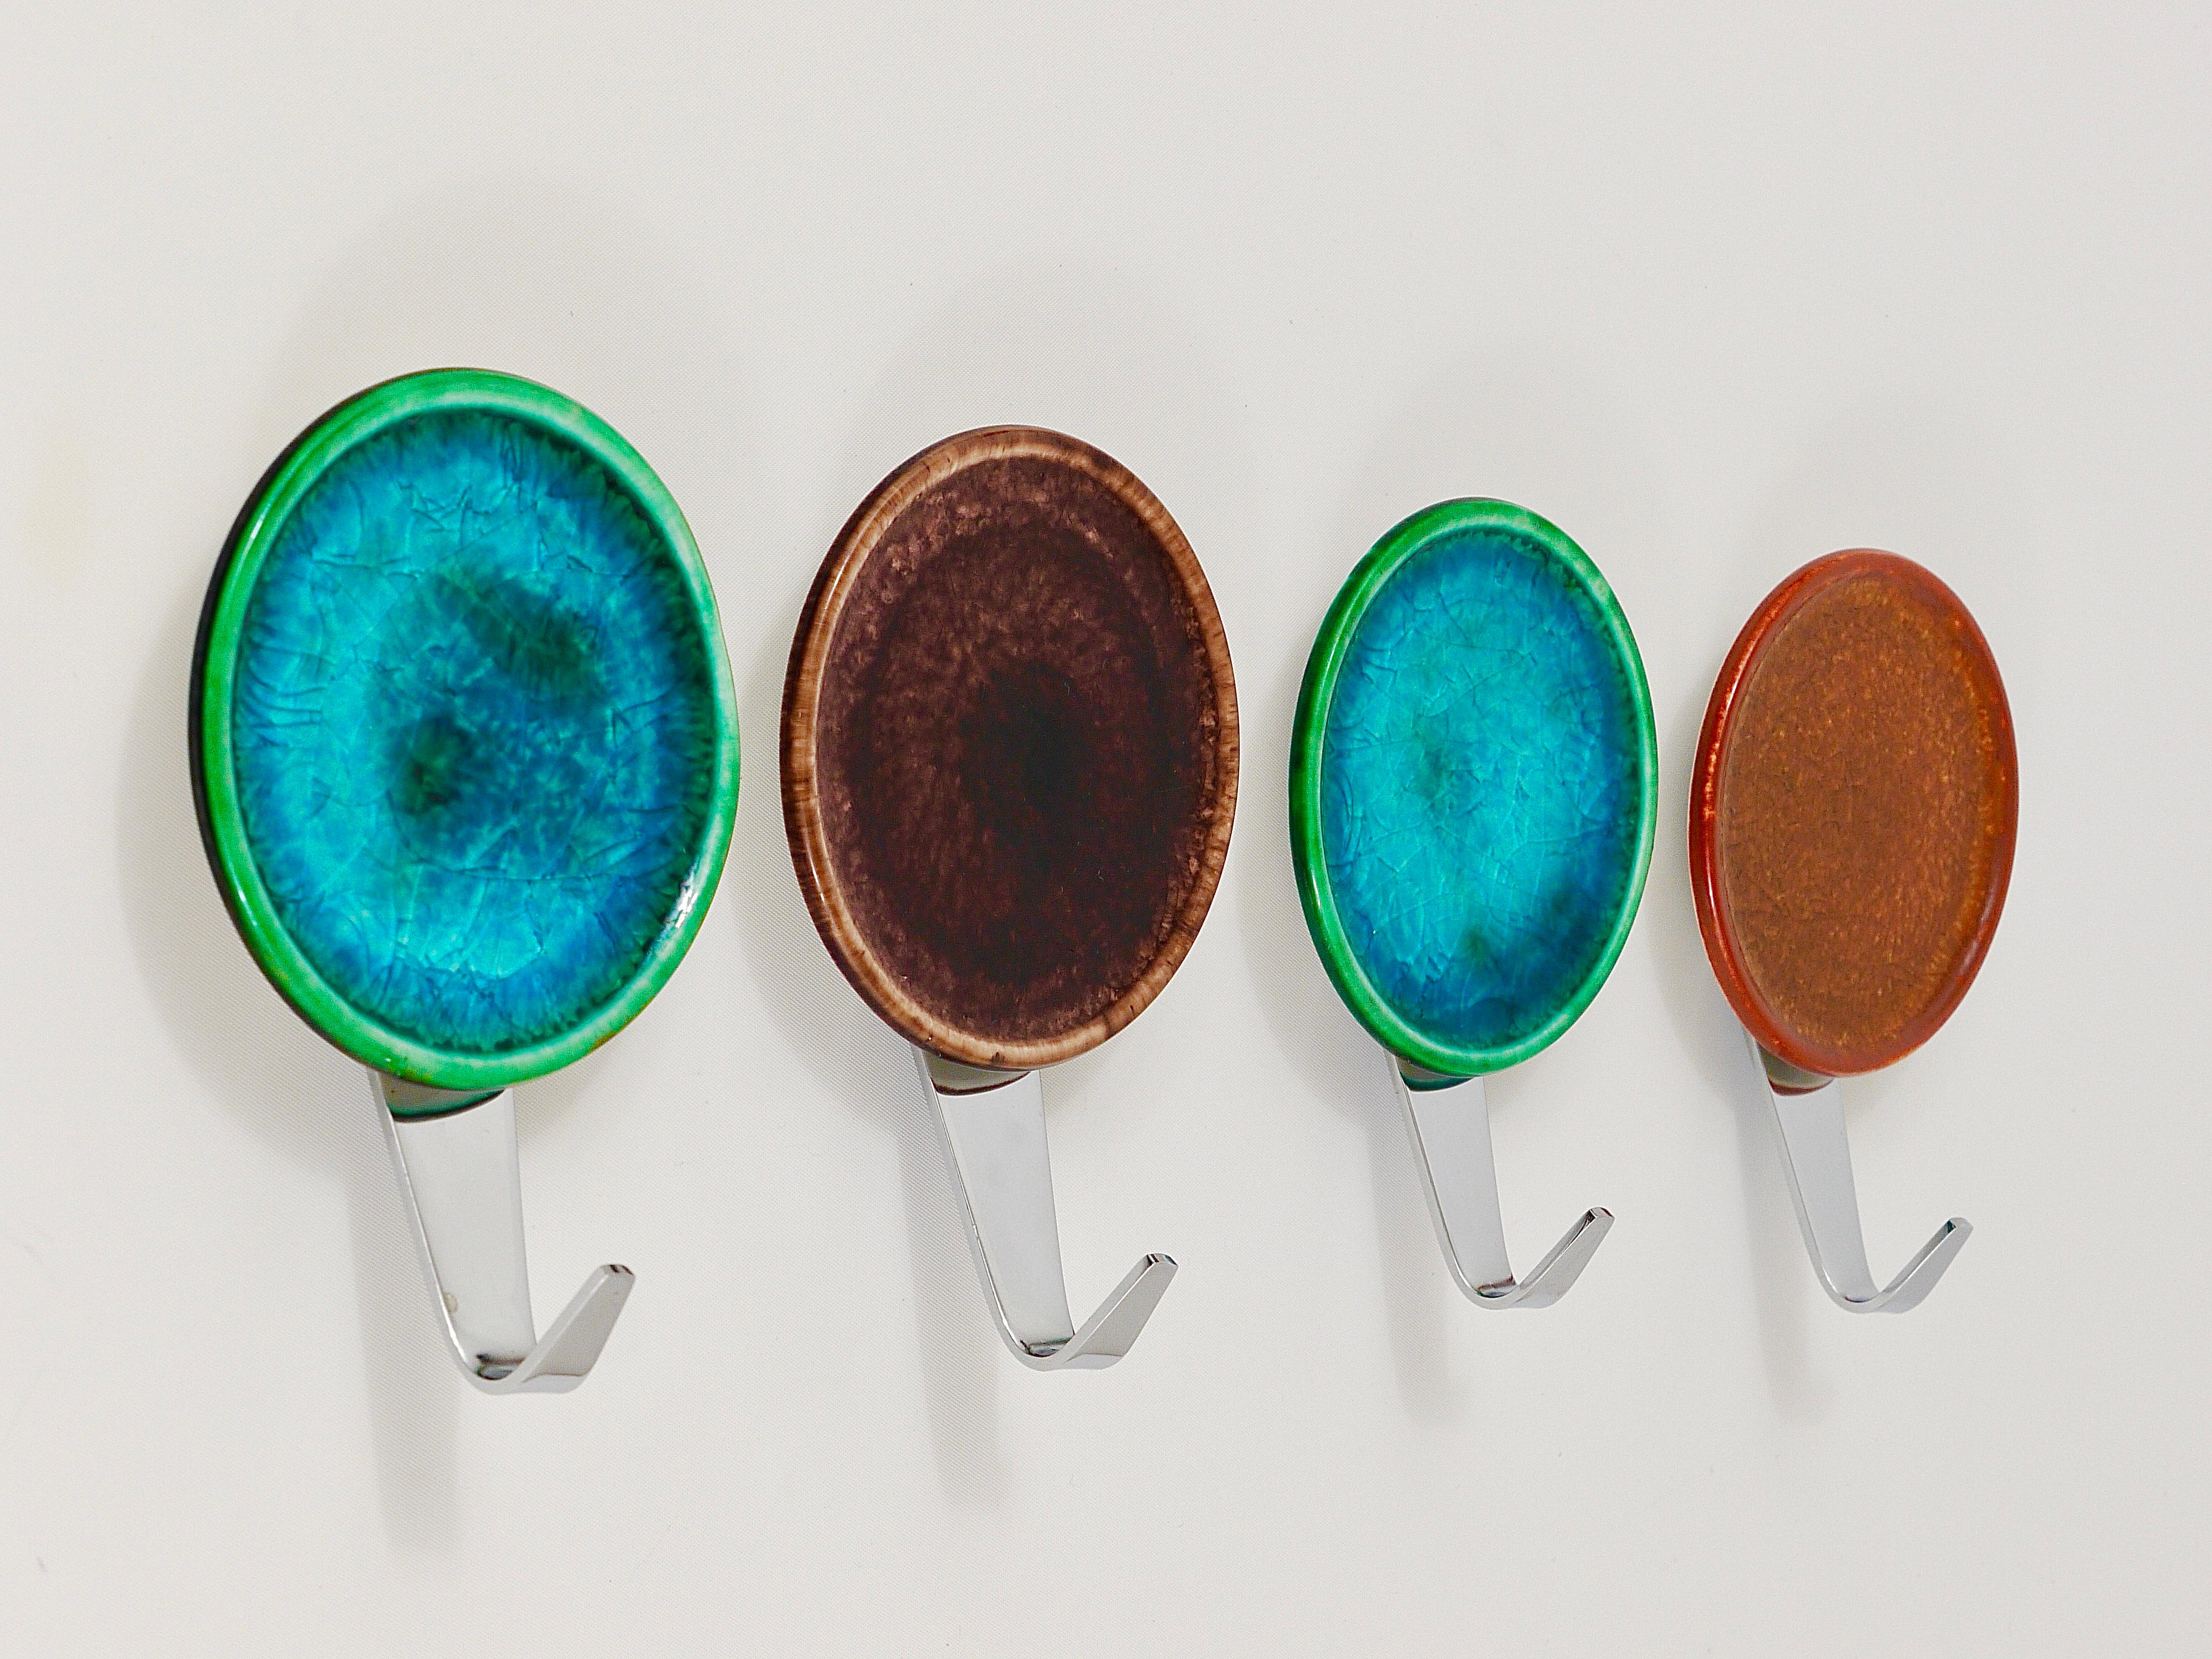 A set of four colorful wall hooks, executed in Italy in the 1960s. Made of chrome-plated brass with colorful round enameled ceramic covers. In very good condition.